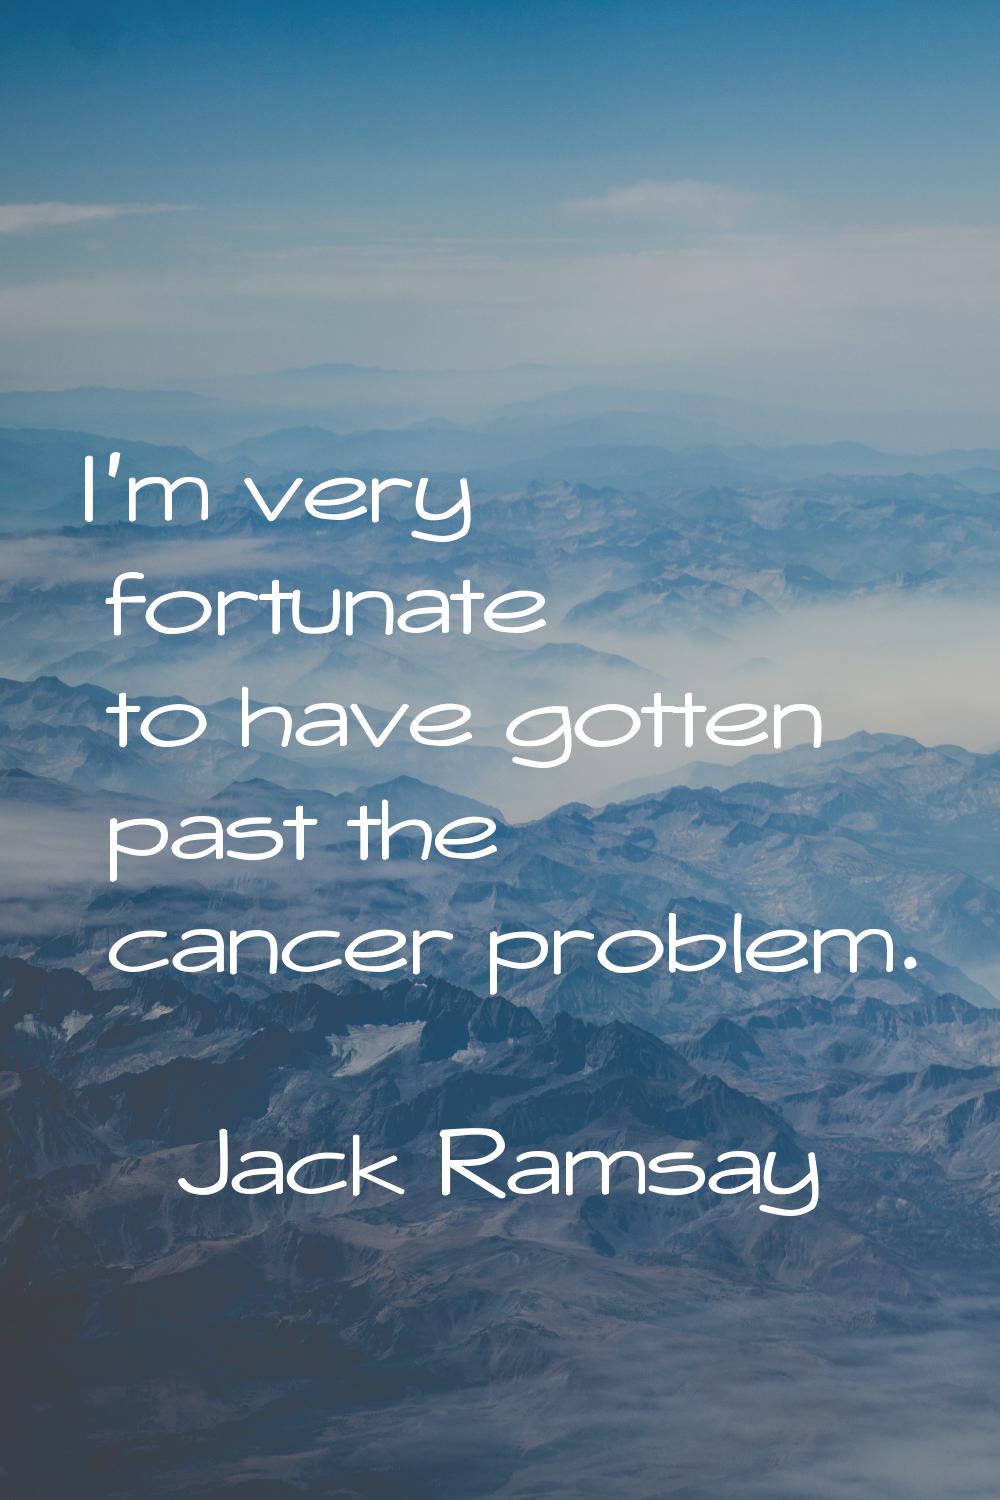 I'm very fortunate to have gotten past the cancer problem.